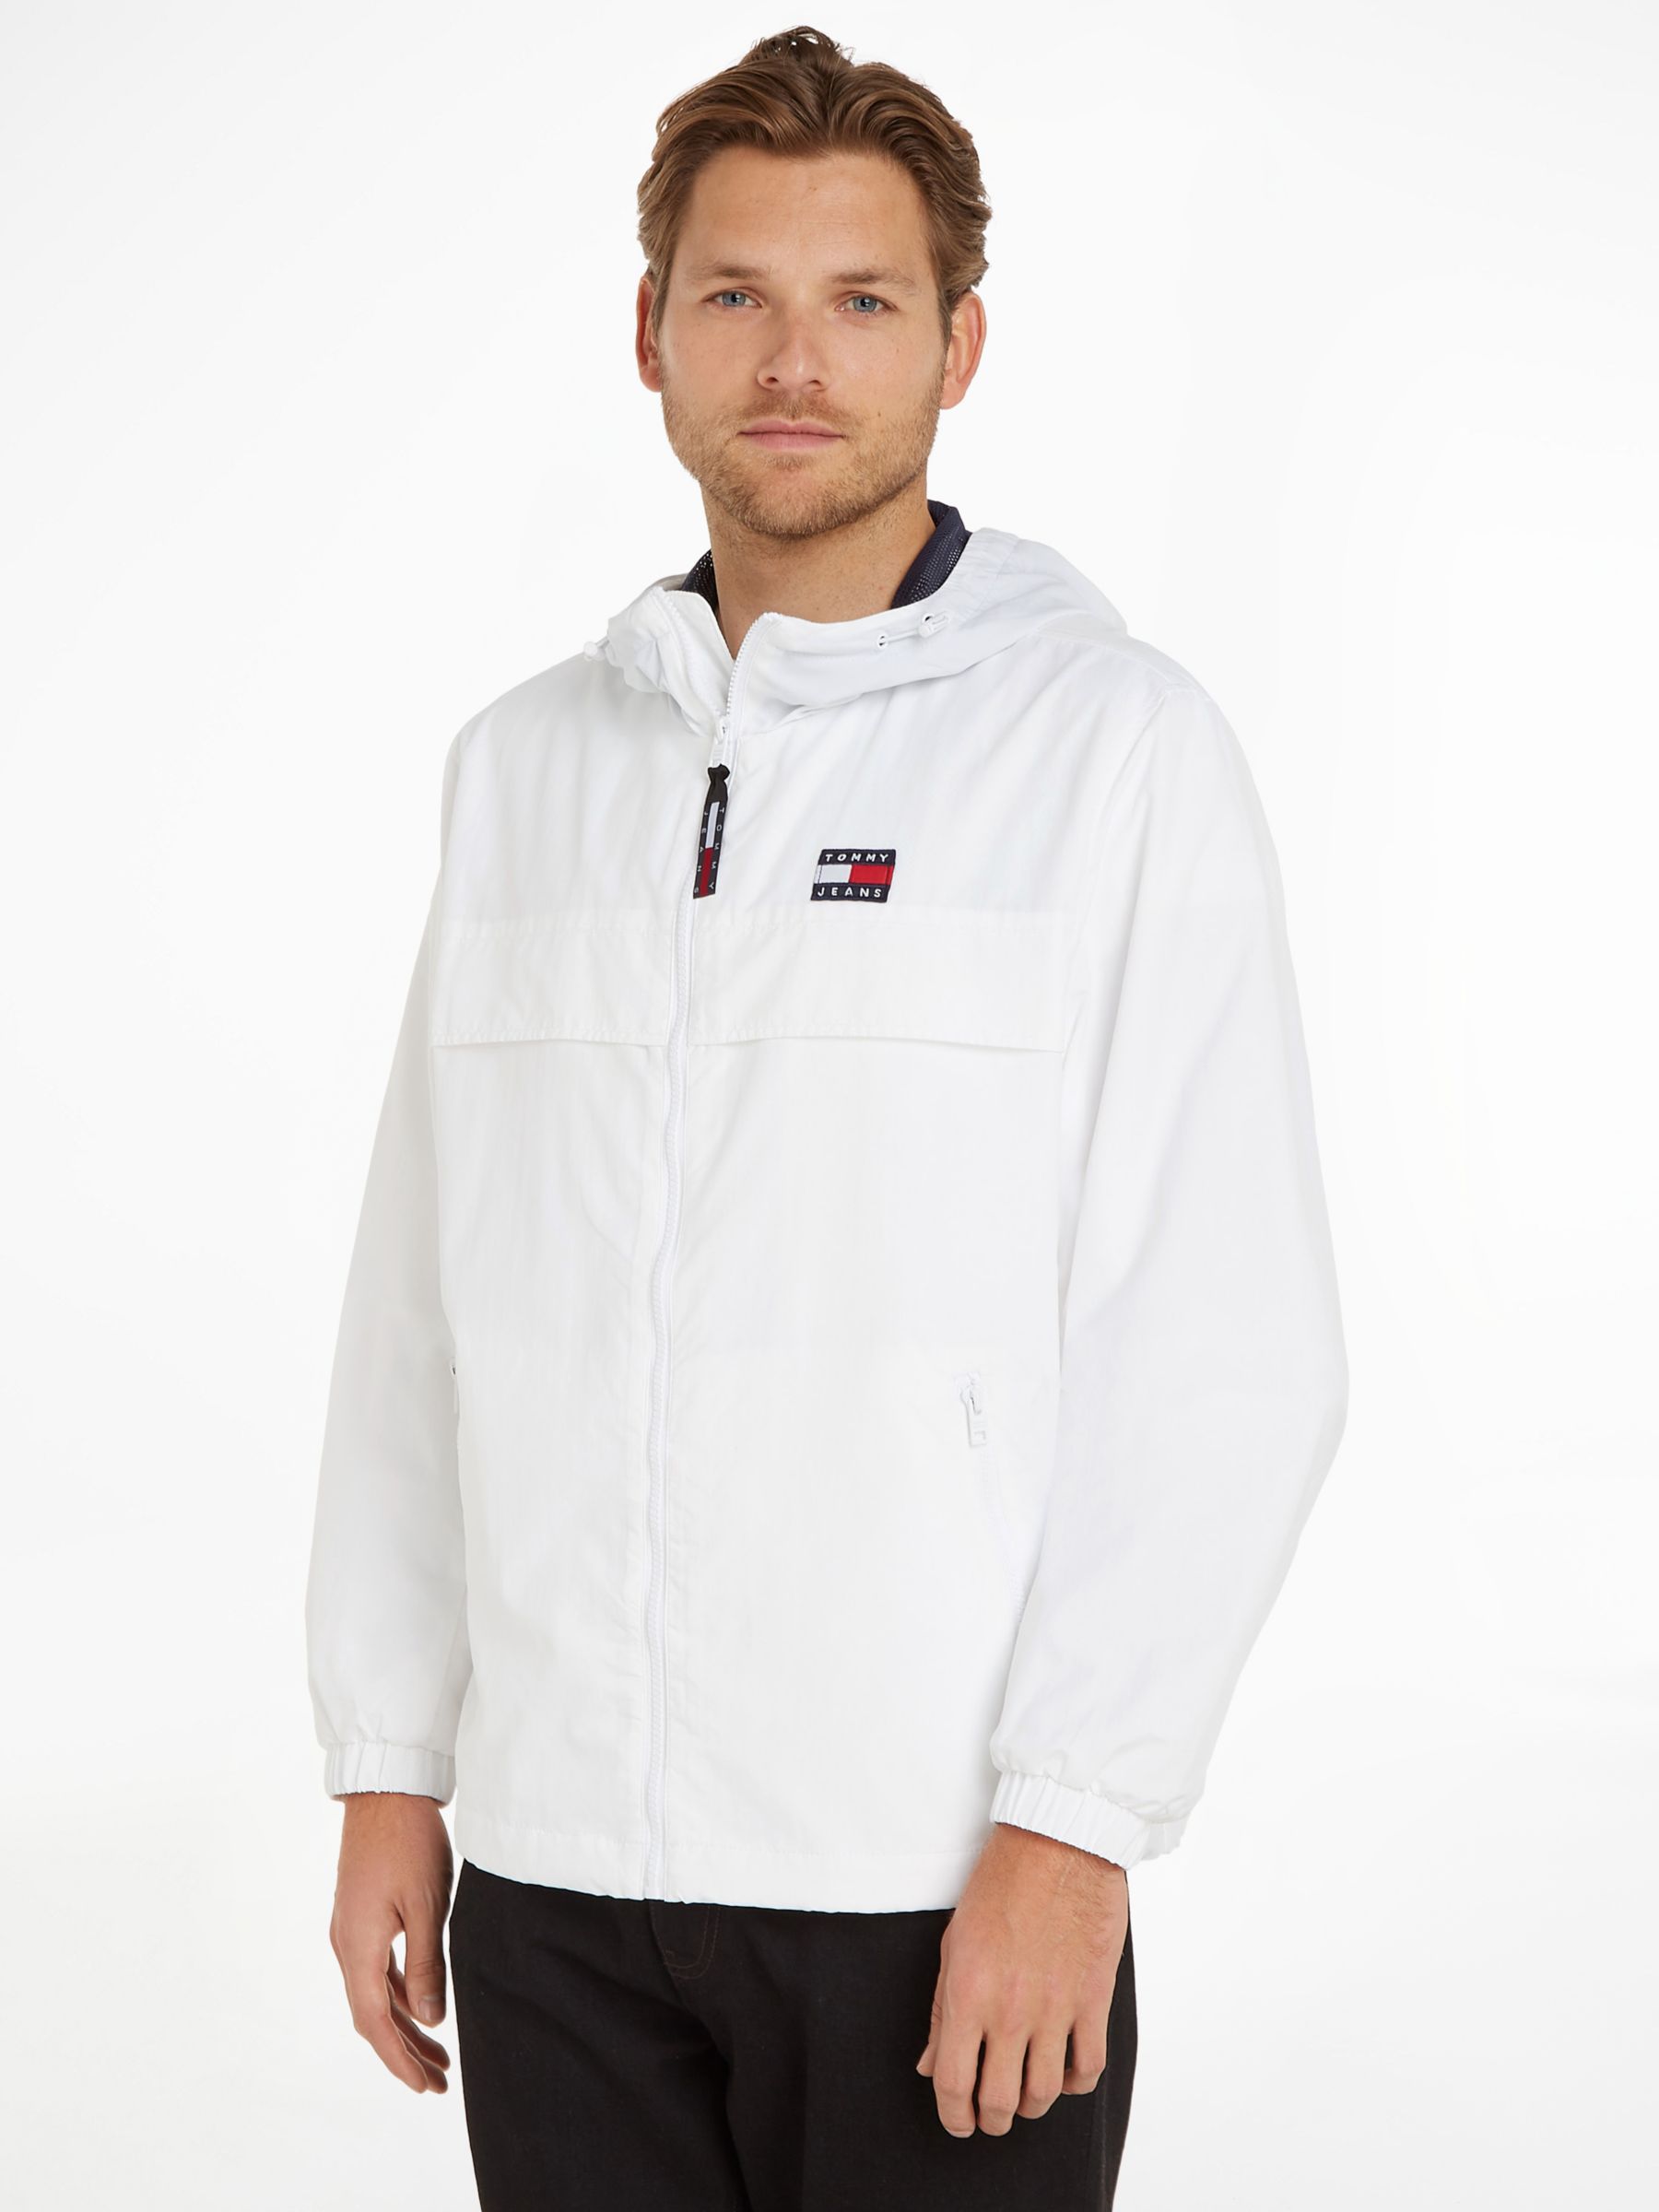 Tommy Hilfiger Chicago Windbreaker, White at John Lewis & Partners